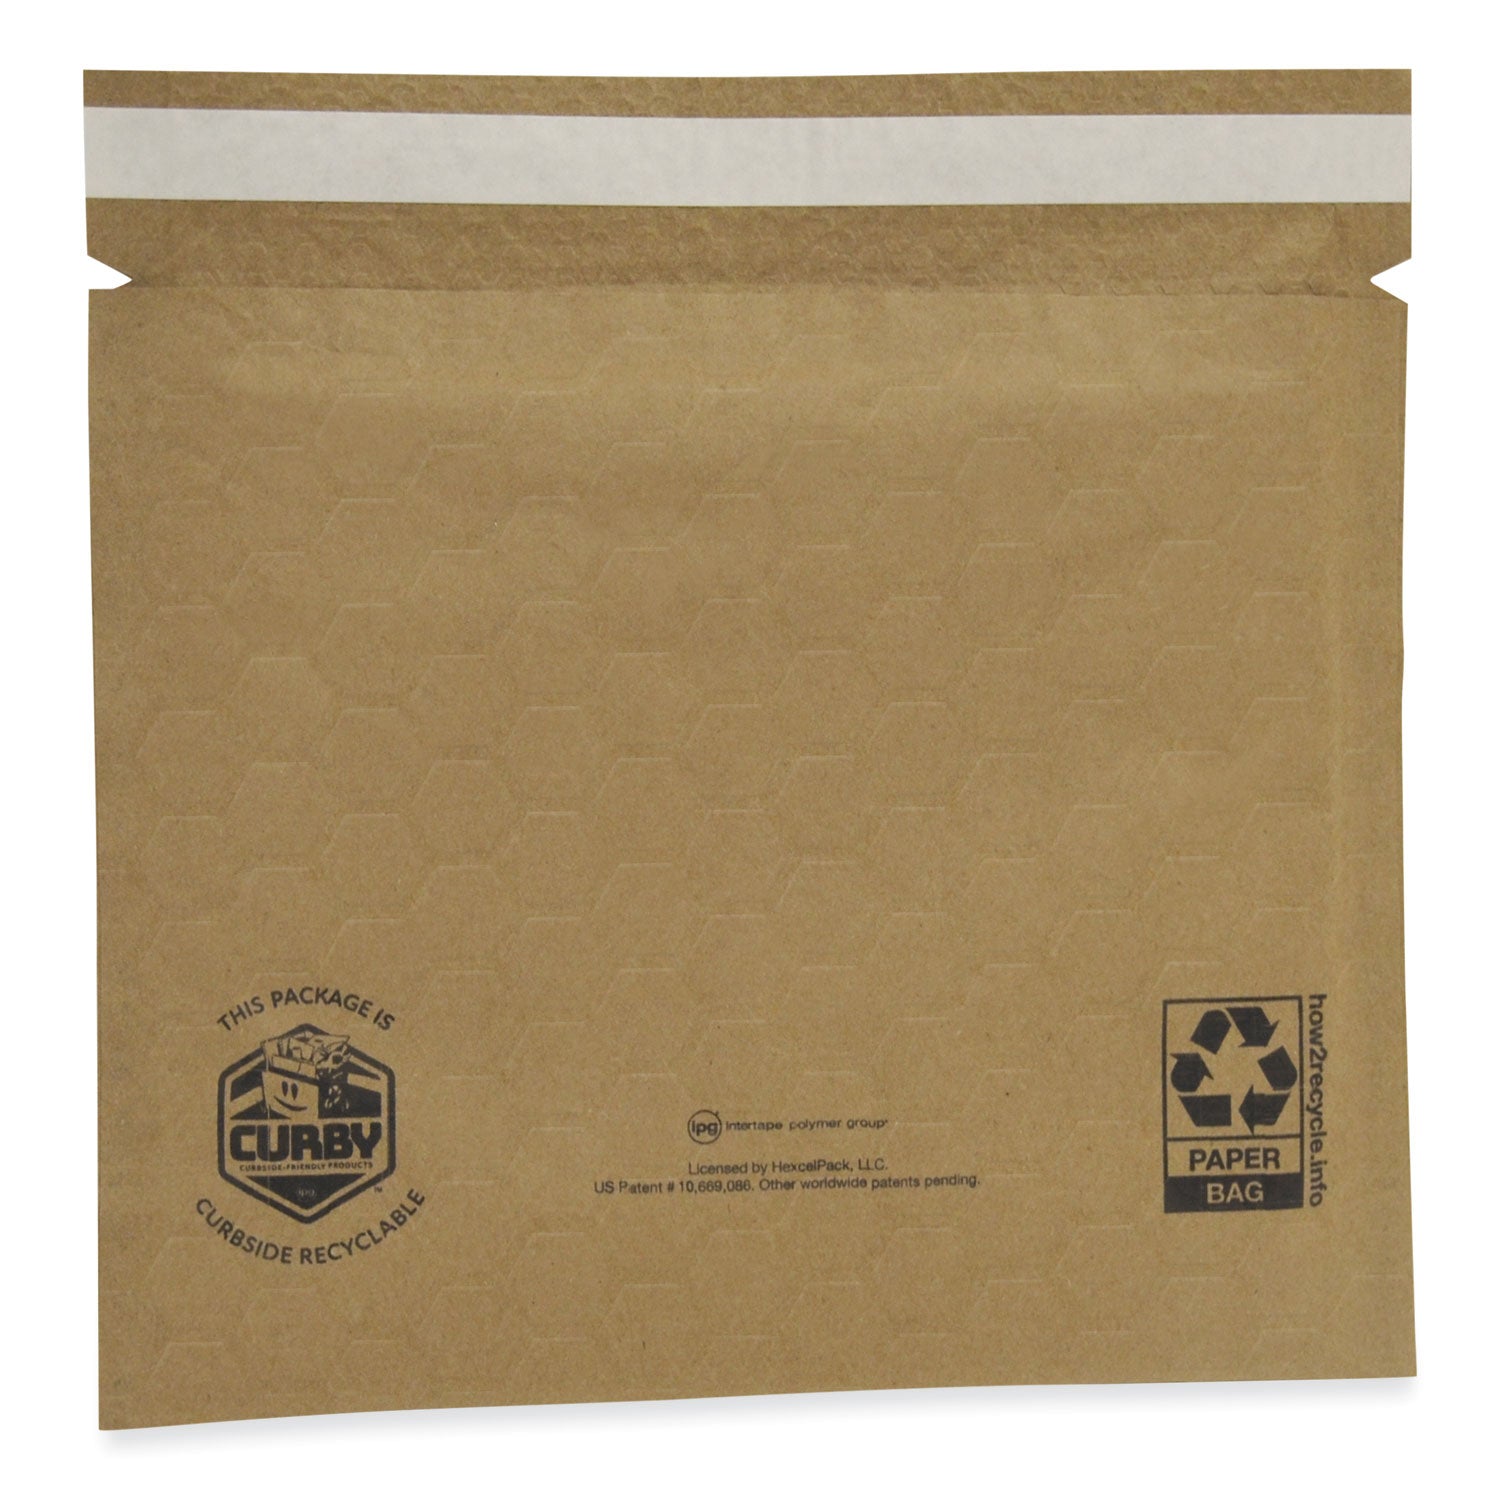 curby-mailer-self-sealing-recyclable-mailer-paper-padding-self-adhesive-#2-1138-x-95-30-carton_ipgcbml2c - 1